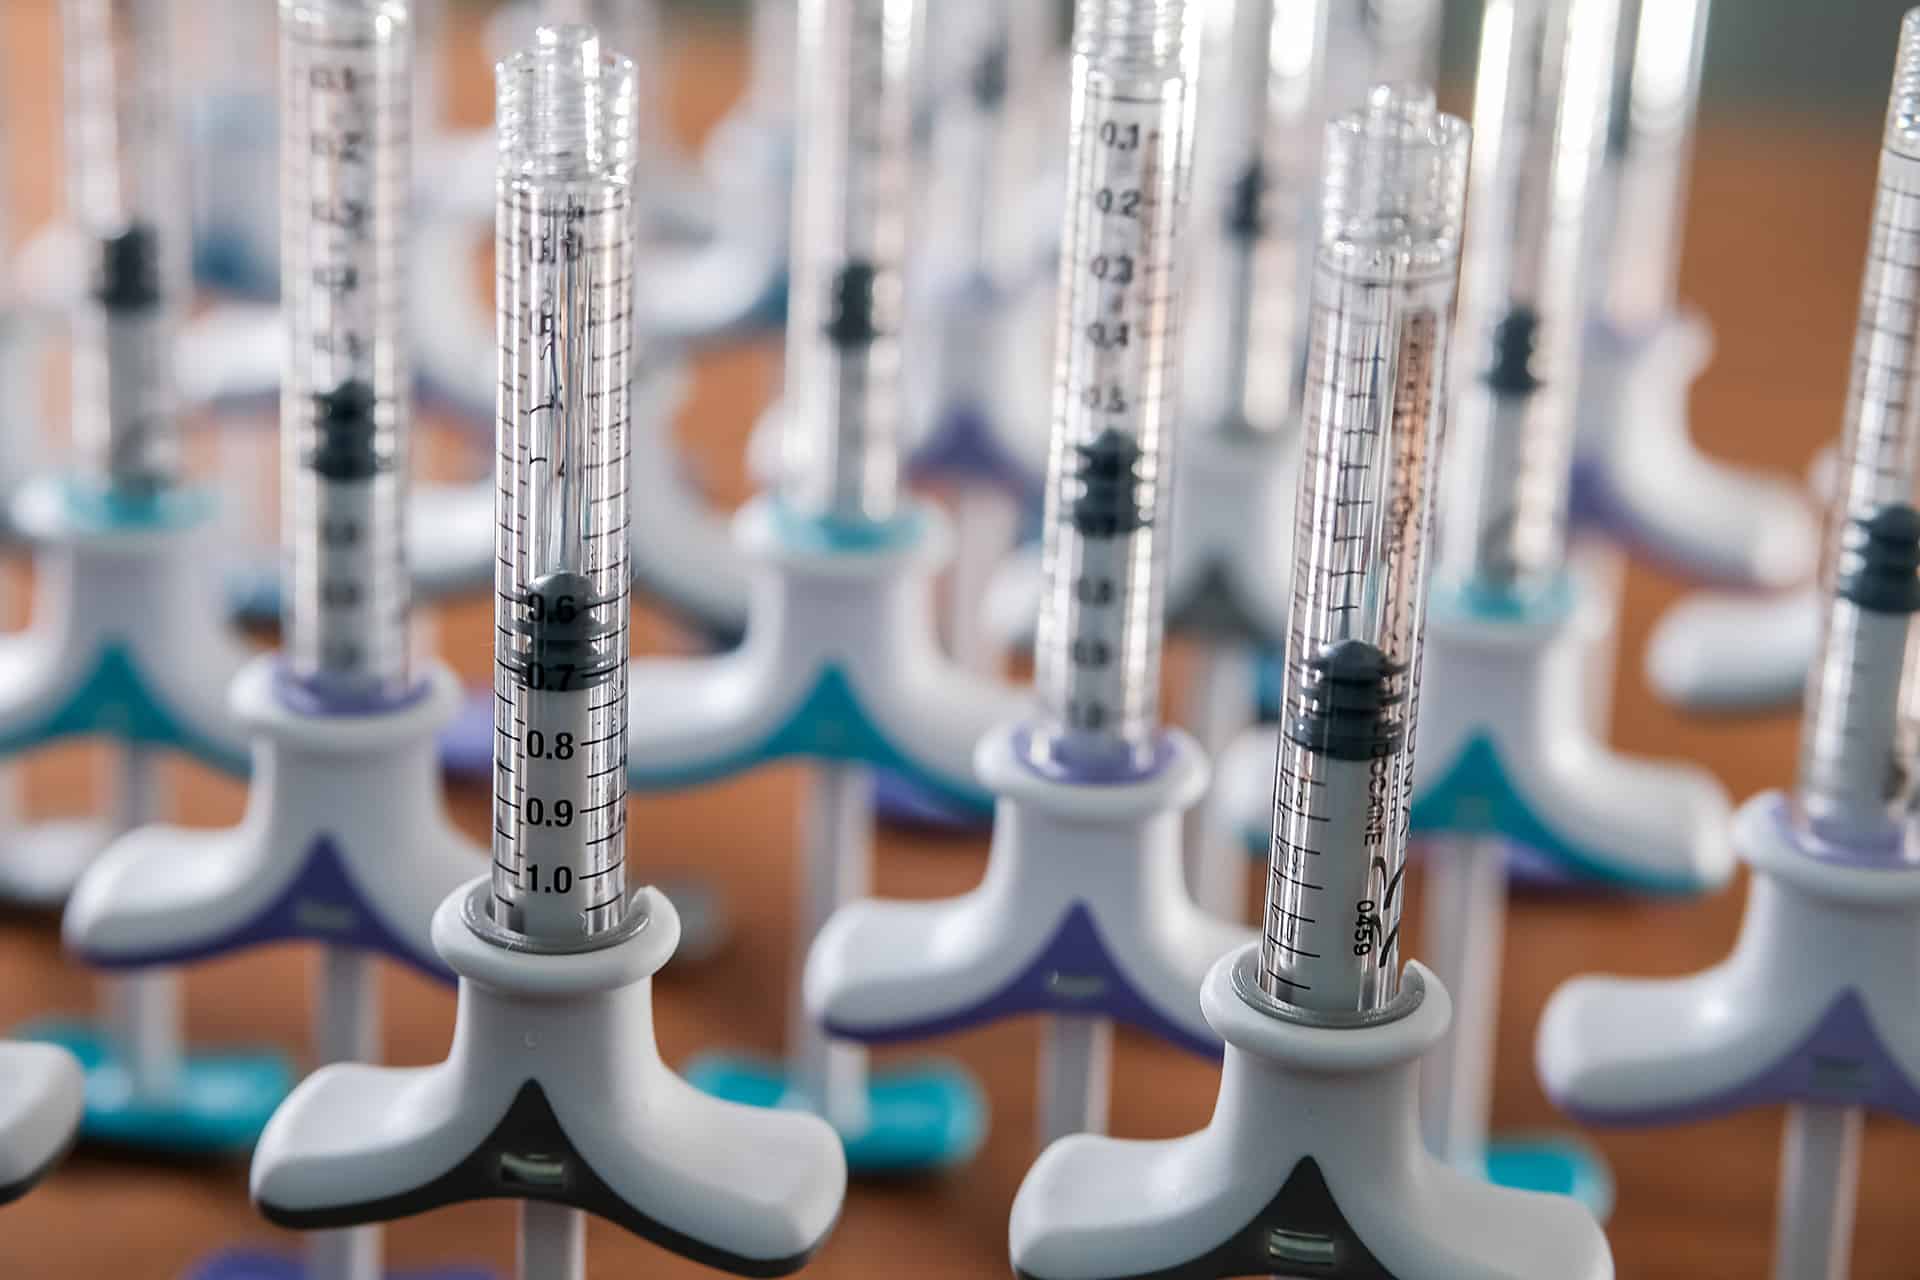 A close-up image of several micropipettes arranged in rows. Each micropipette has a clear, graduated cylinder and white and blue adjustable volume controls. The background shows more micropipettes out of focus, creating a pattern.